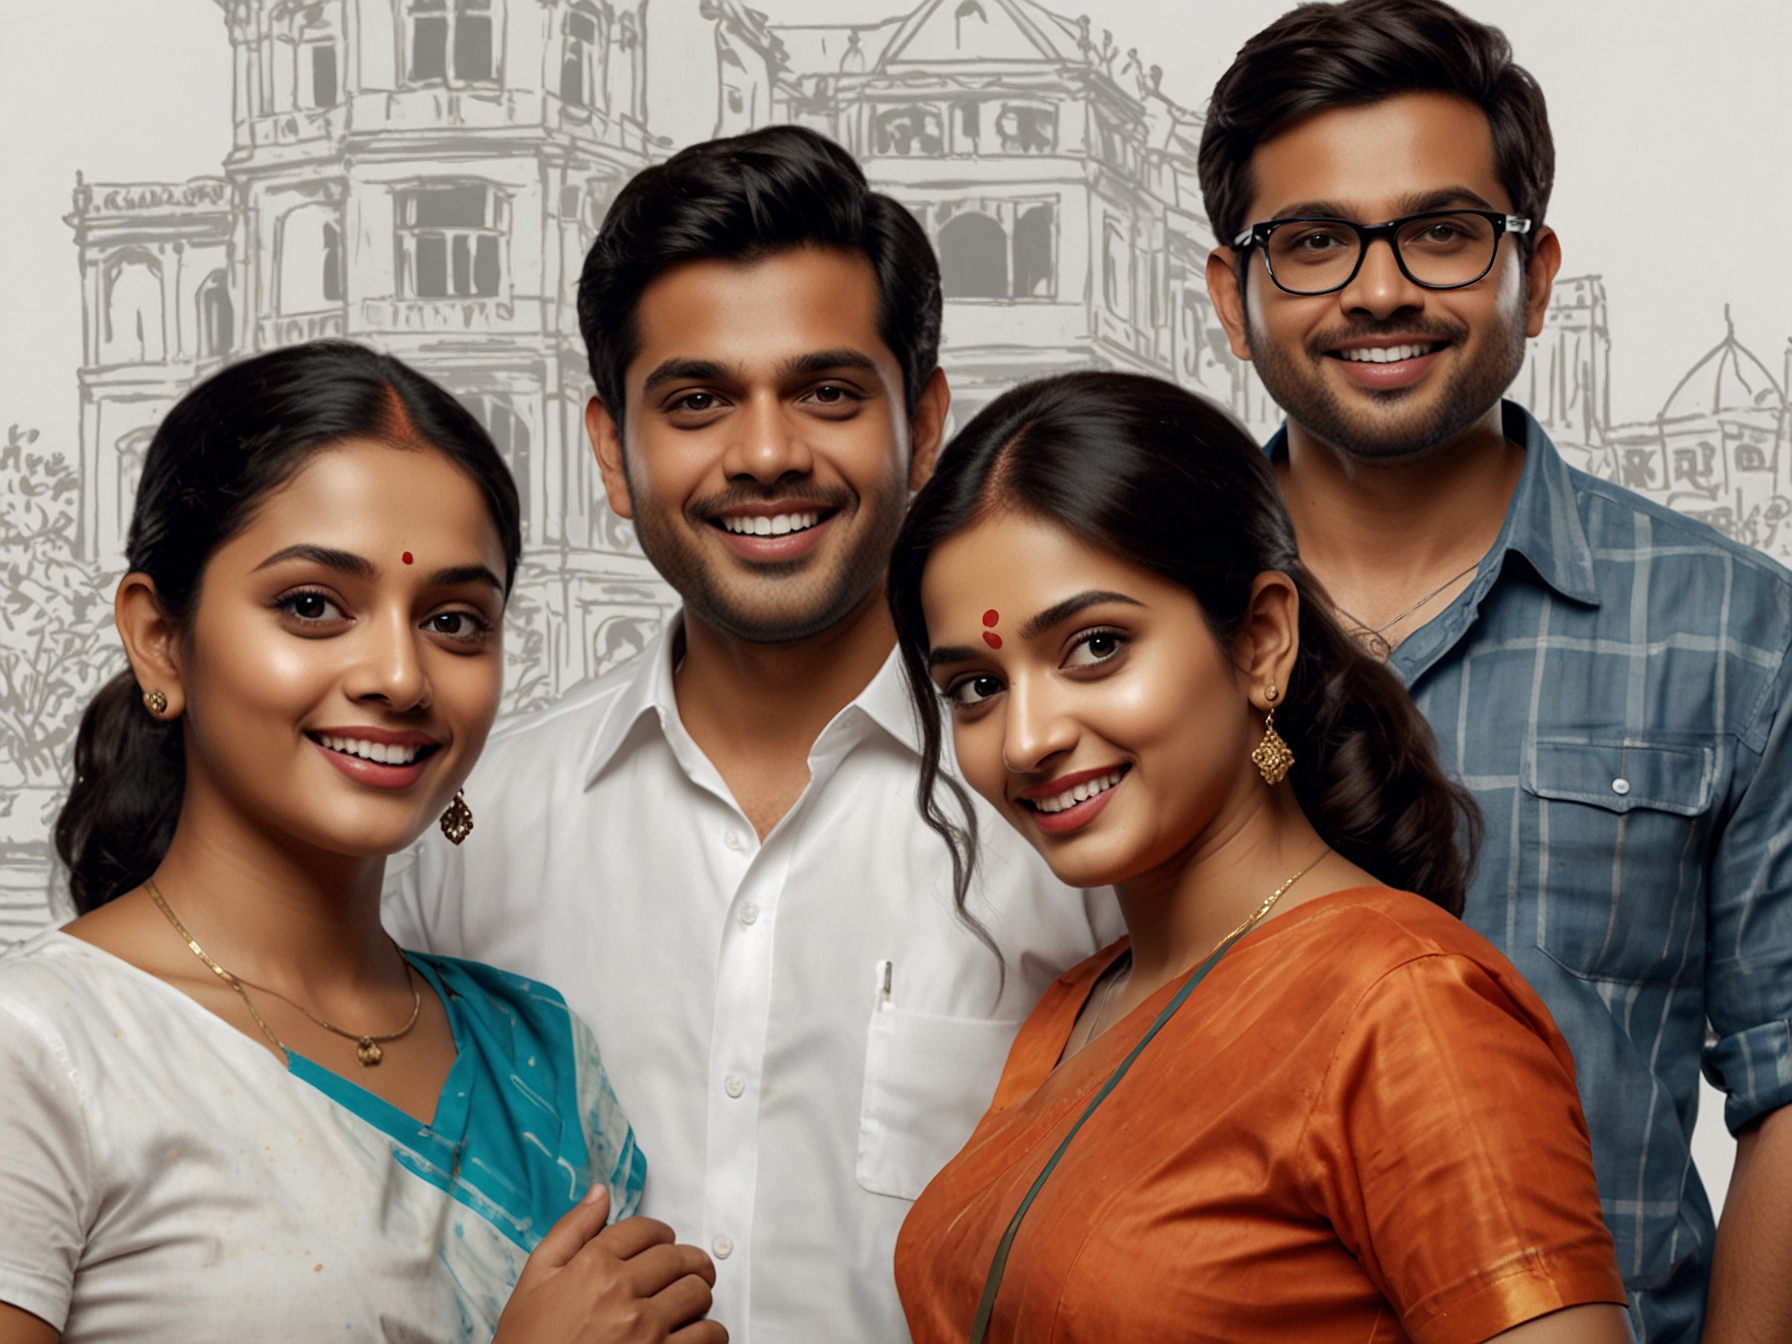 'Hamare Baarah' cast including Ashwini Kalsekar, Abhimanyu Singh, and Parth Samthaan, whose performances add depth to the film, engaging audiences and ensuring its success.